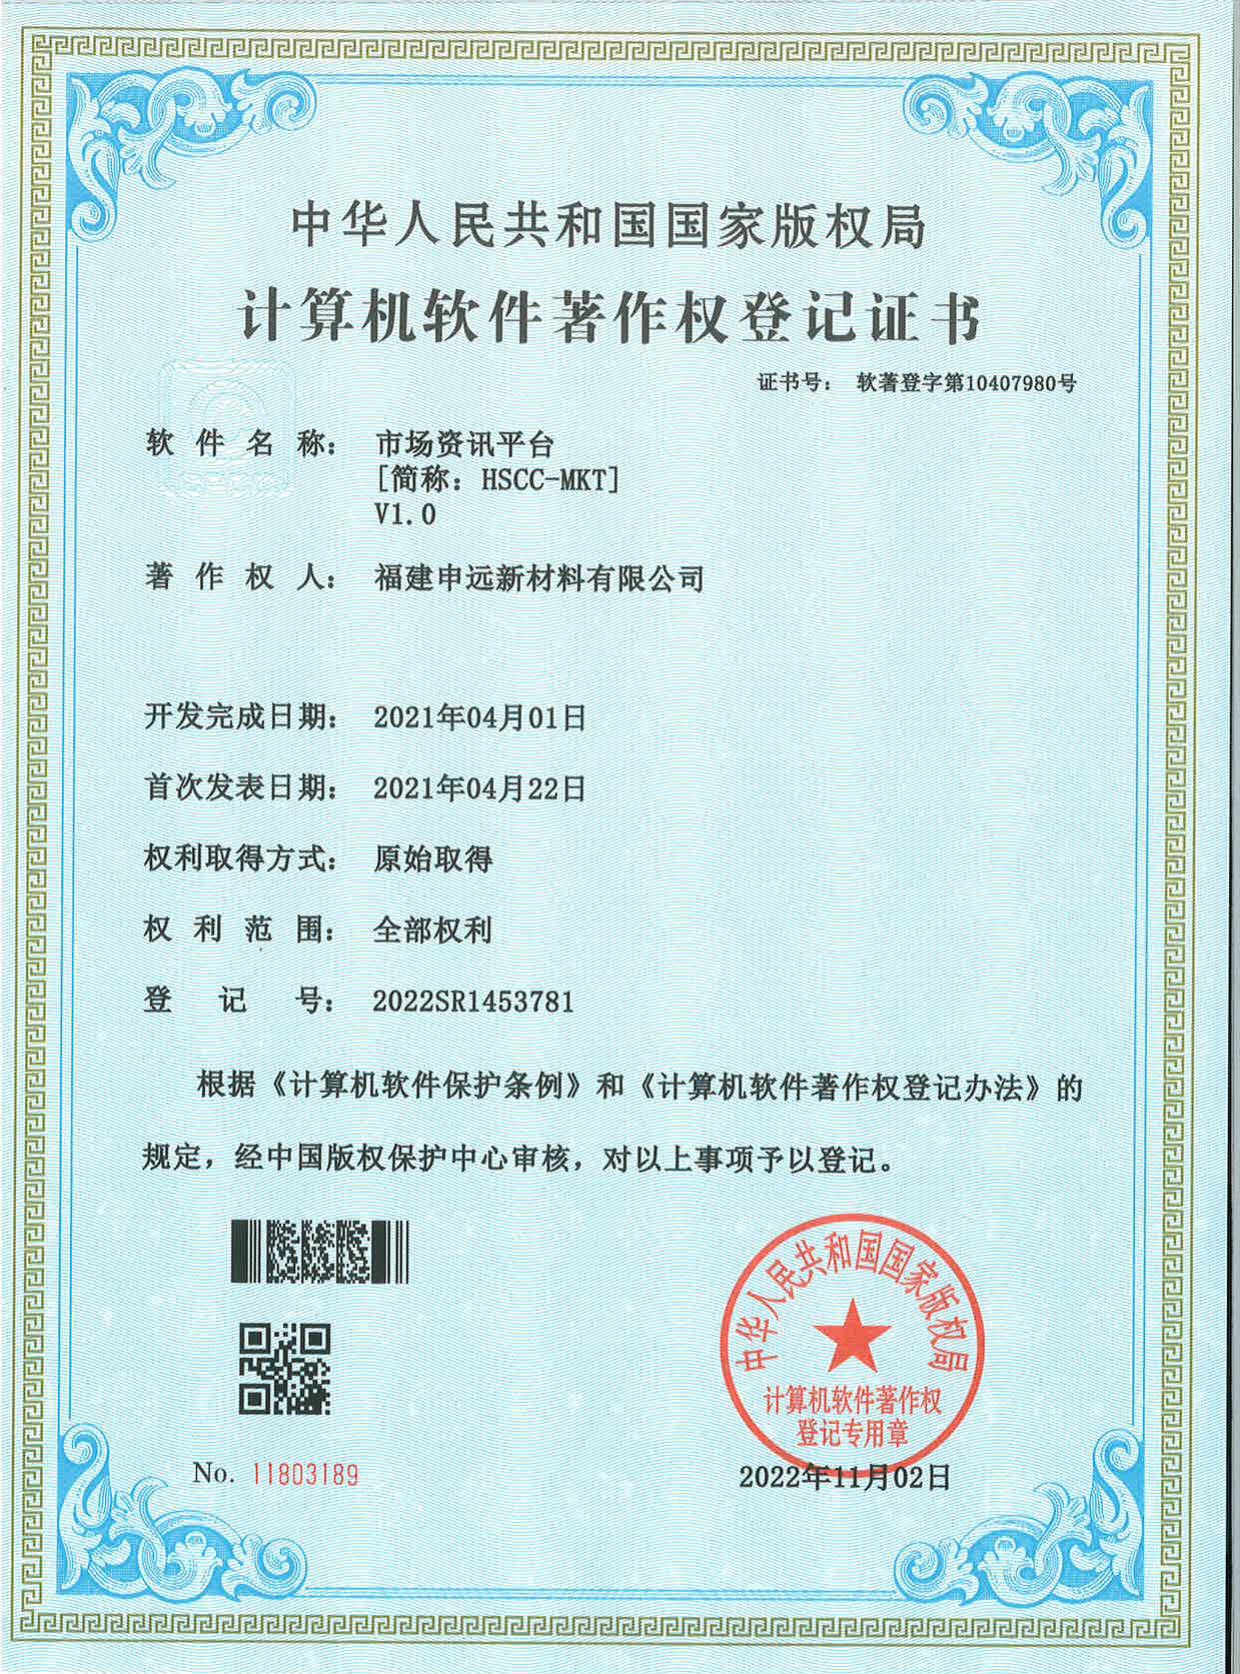 the Chemical Segment Won Two Computer Software Copyright Registration Certificates. Accelerate the Transformation And Upgrading of Information Management Integration